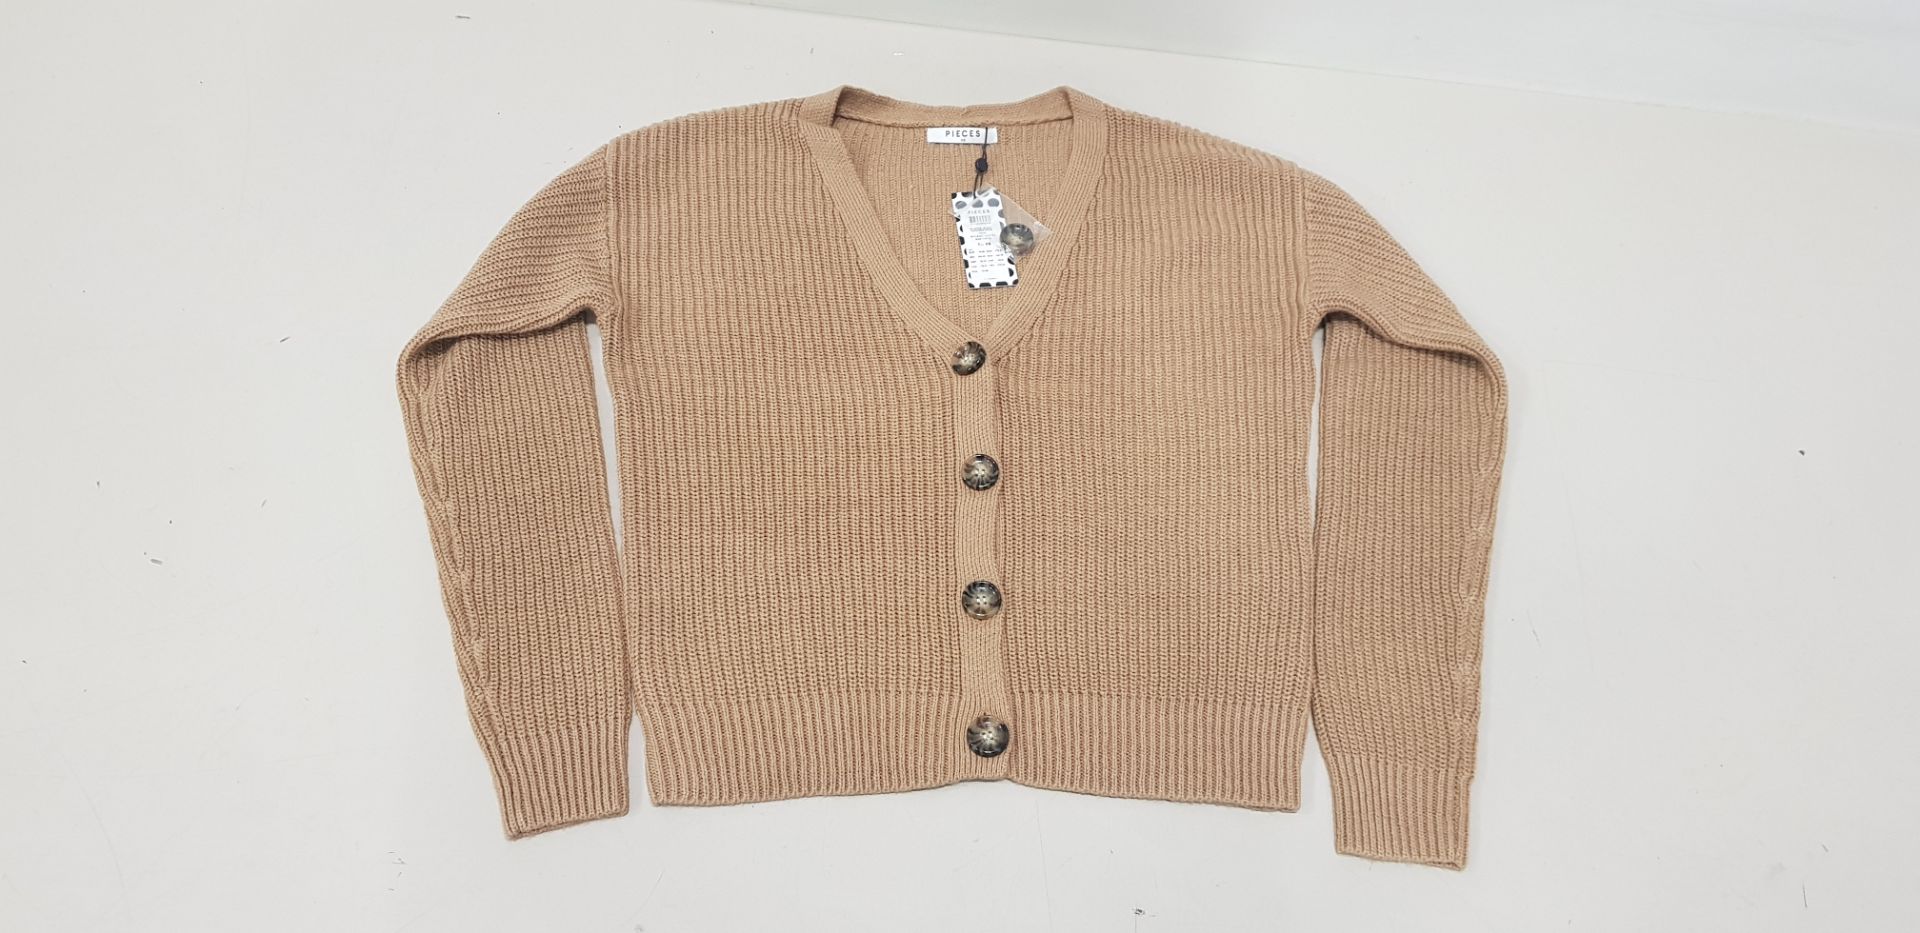 32 X BRAND NEW PIECES KNIT CARDIGAN NOOS (SIZE XL - L) - RRP £32.00PP